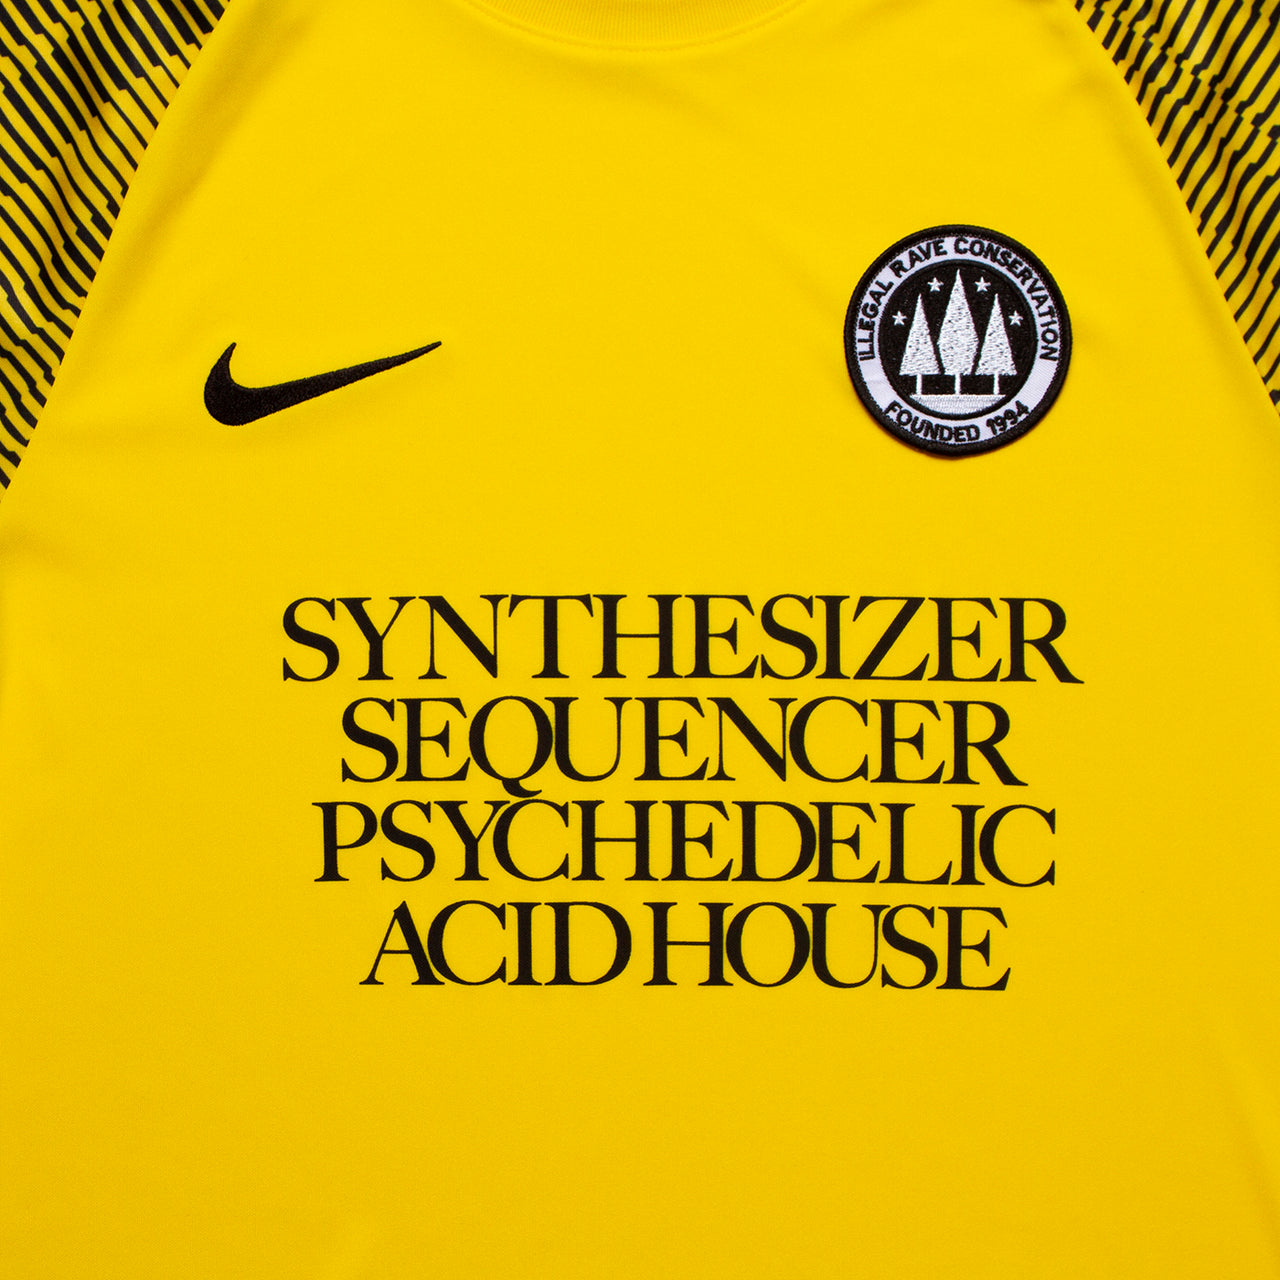 Wasted Heroes FC Academy Black Sleeve 012 - Football Jersey - Yellow Rave